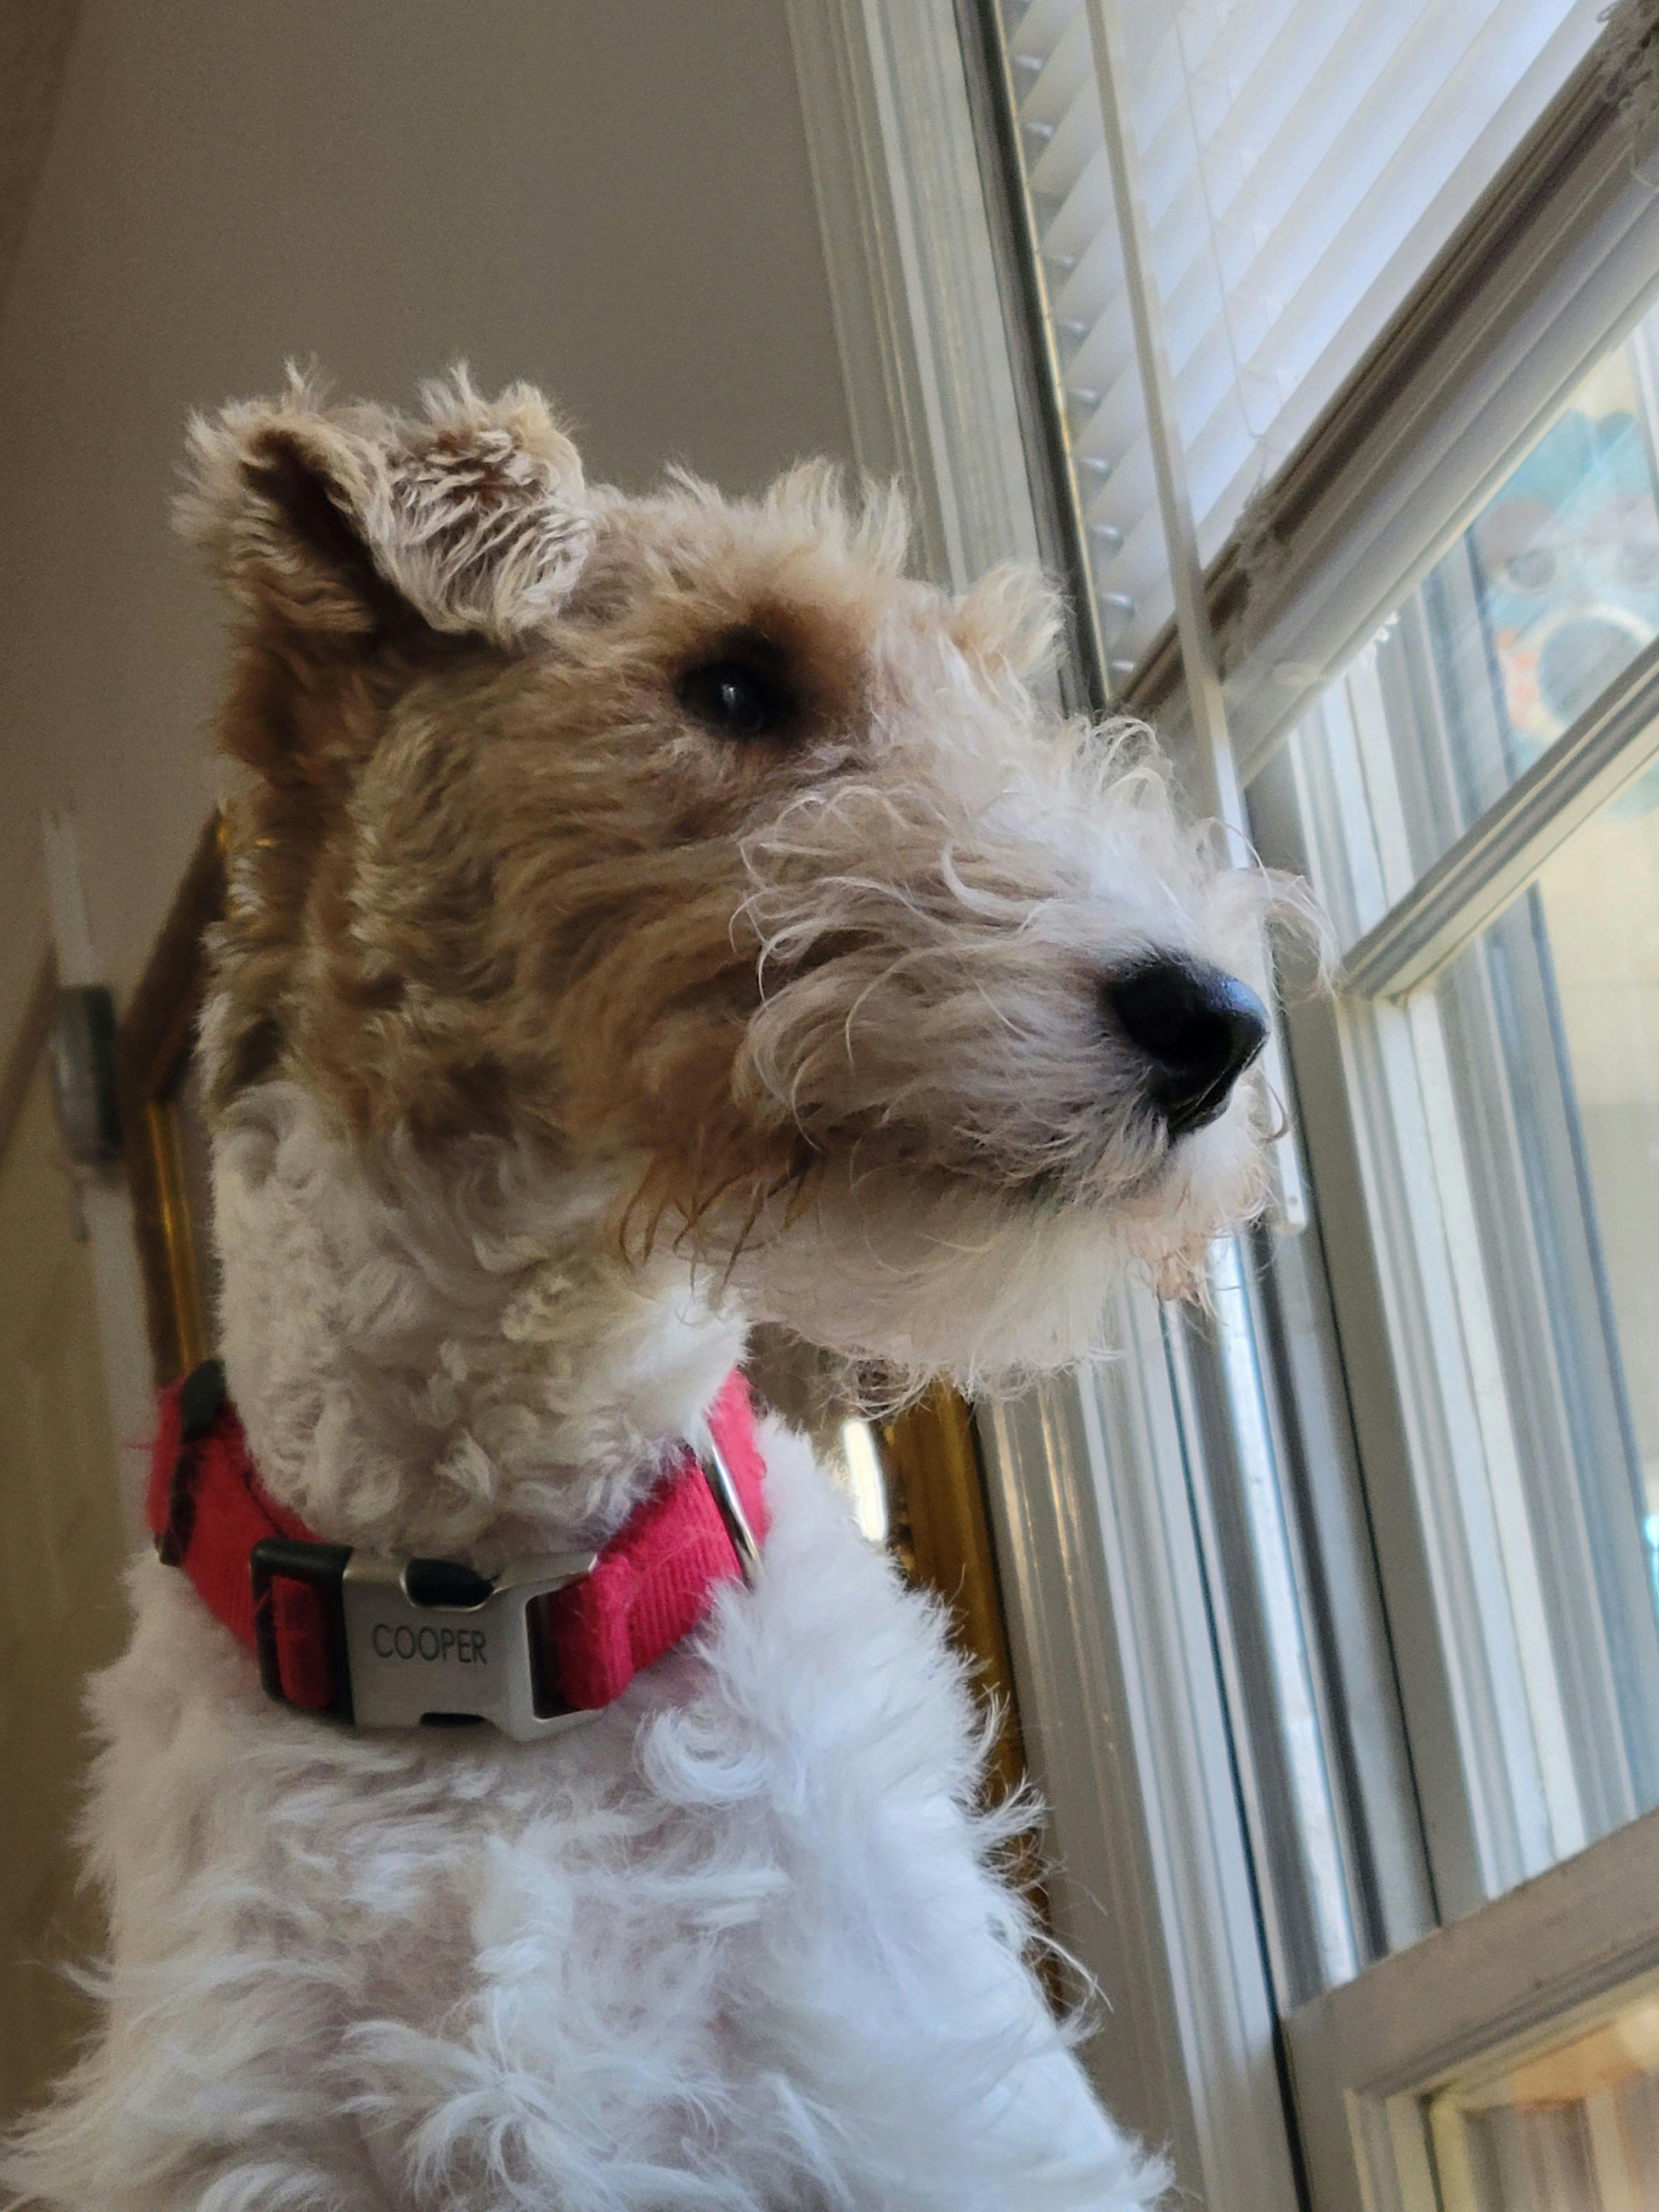 Cooper, a wire fox terrier, was rushed to the emergency room after ingesting some his owners caffeine pill (Image courtesy of Pet Poison Helpline)